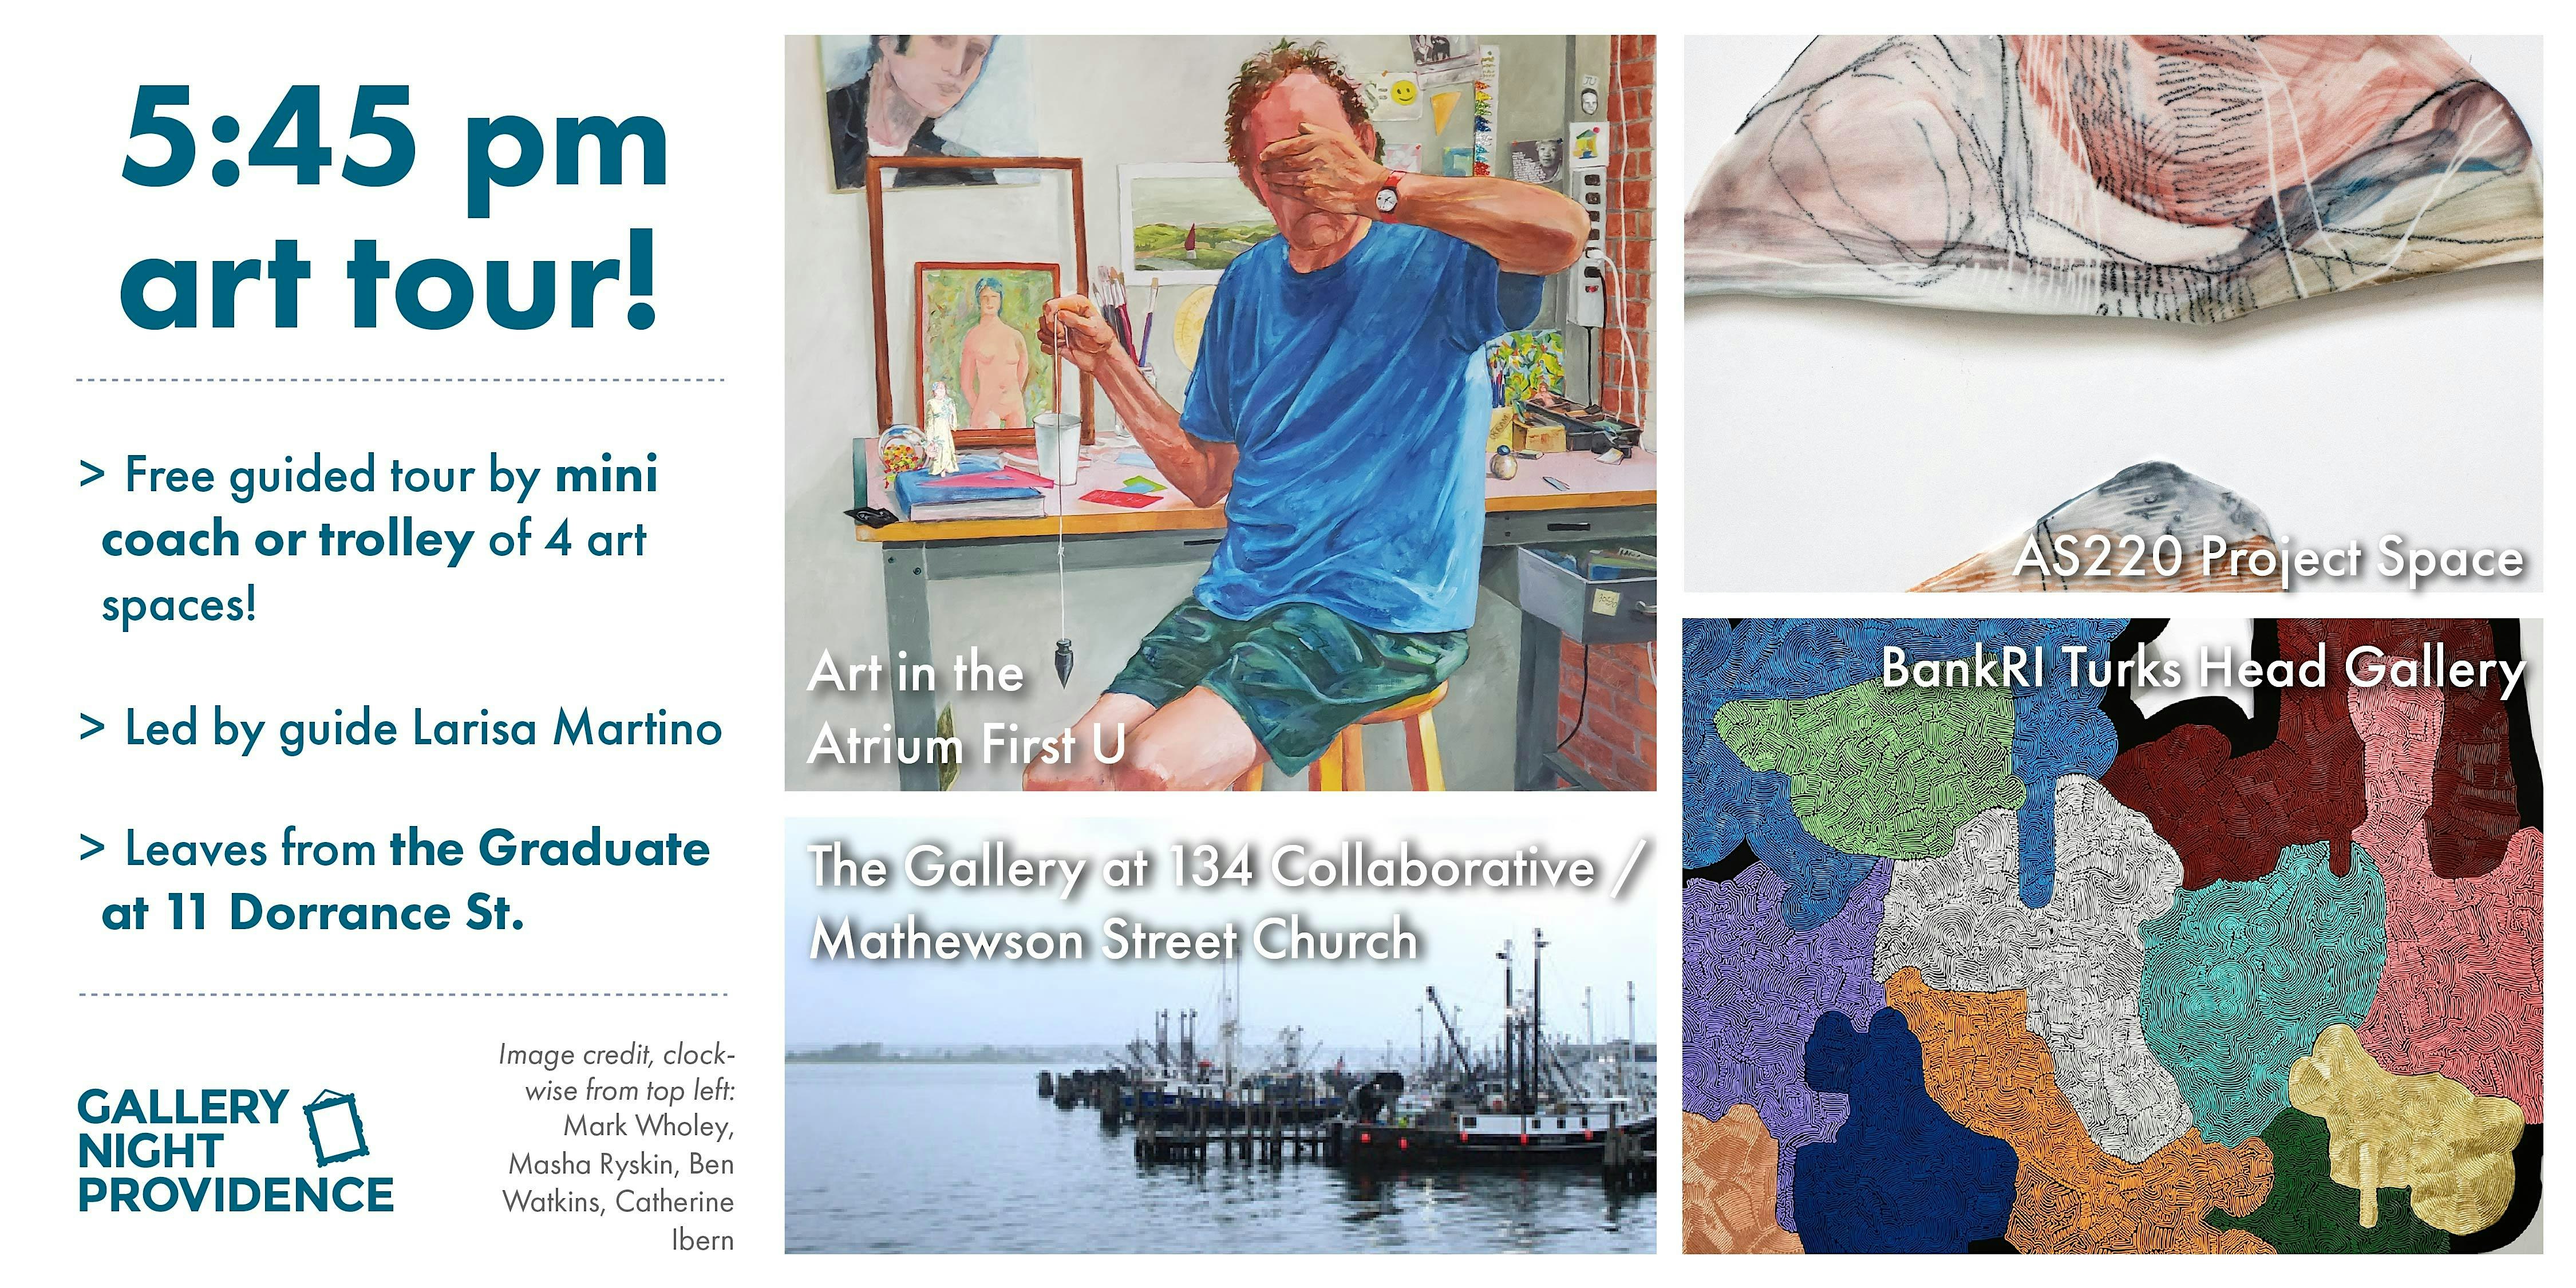 5:45 pm Trolley or Mini Coach Art Tour! with Gallery Night Providence